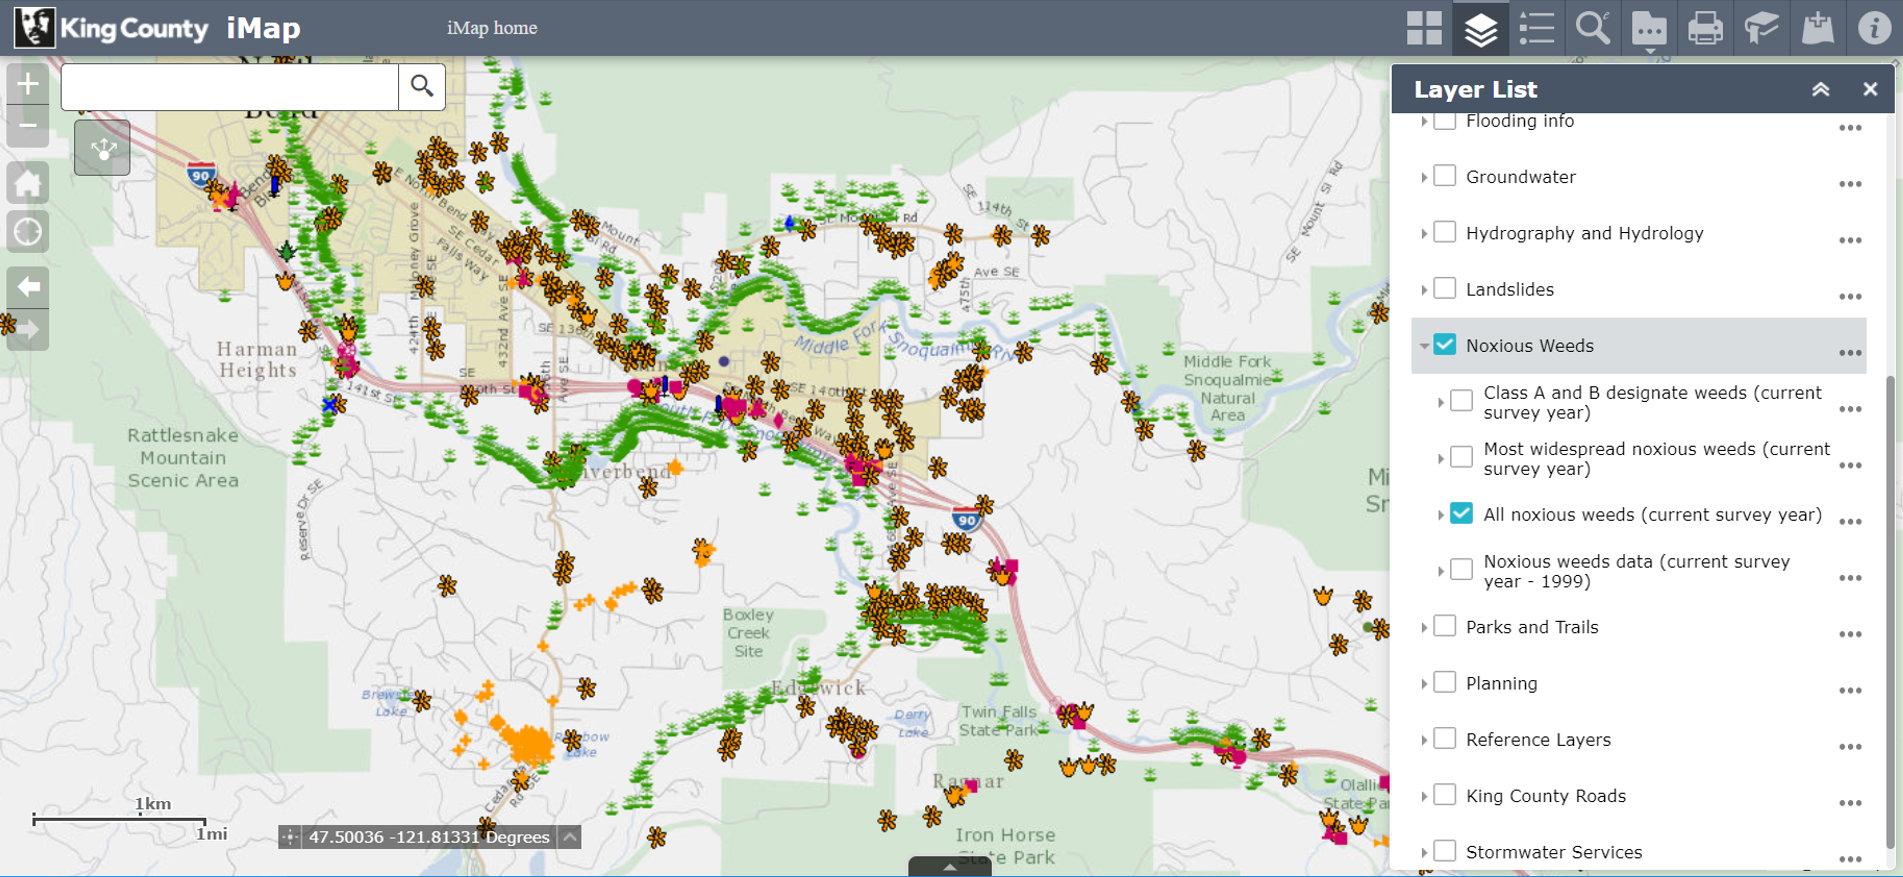 King County iMap Noxious Weeds Layer Screen Shot - click for map page